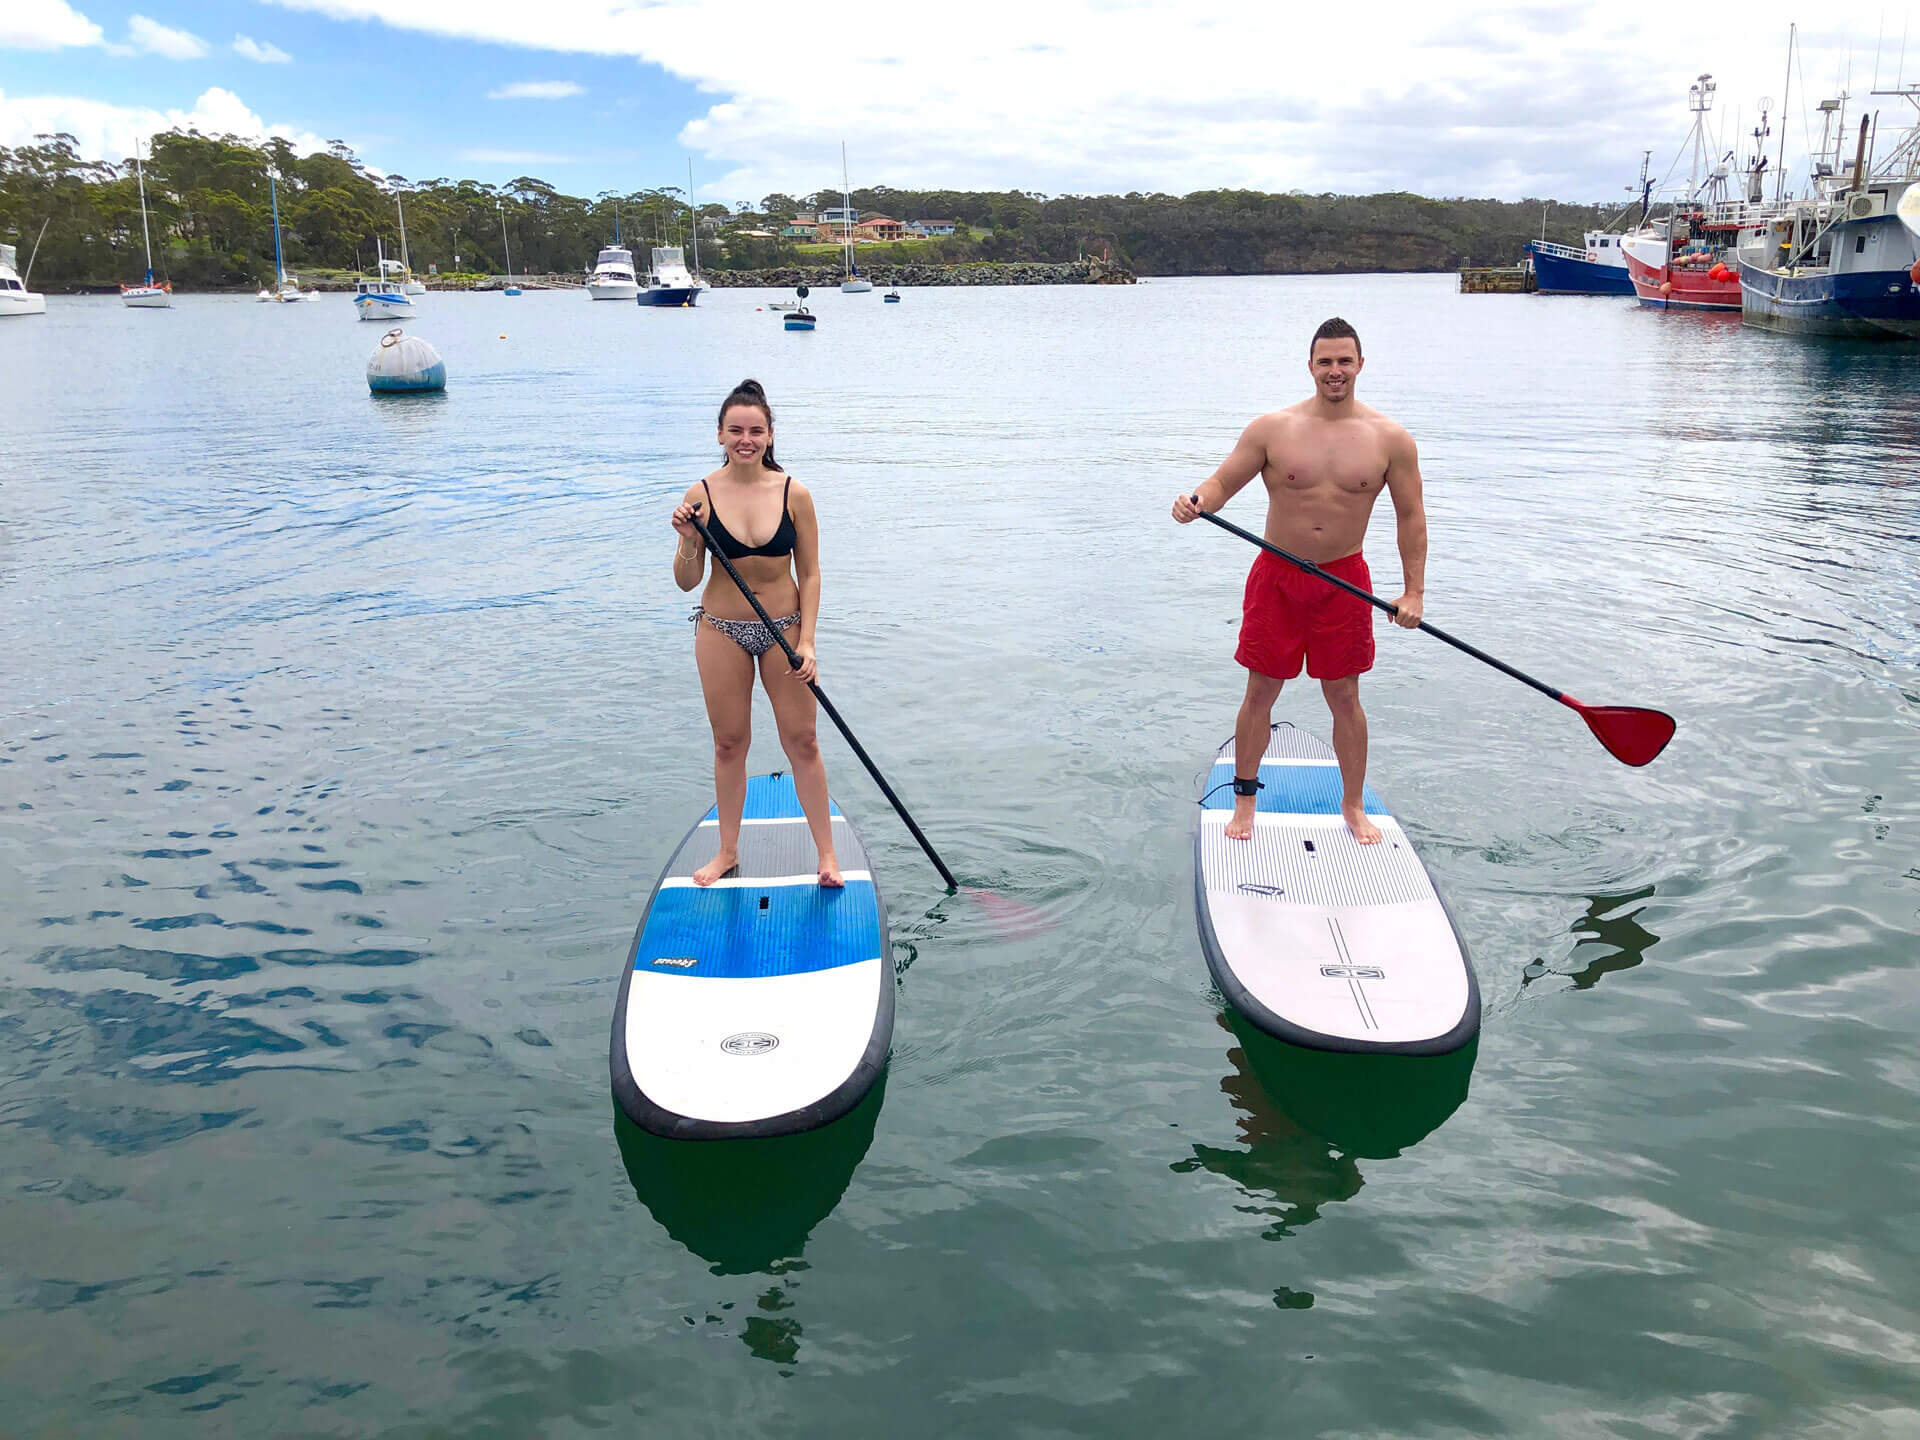 Smiling couple standing on individual paddle boards on the water with boats in the back ground